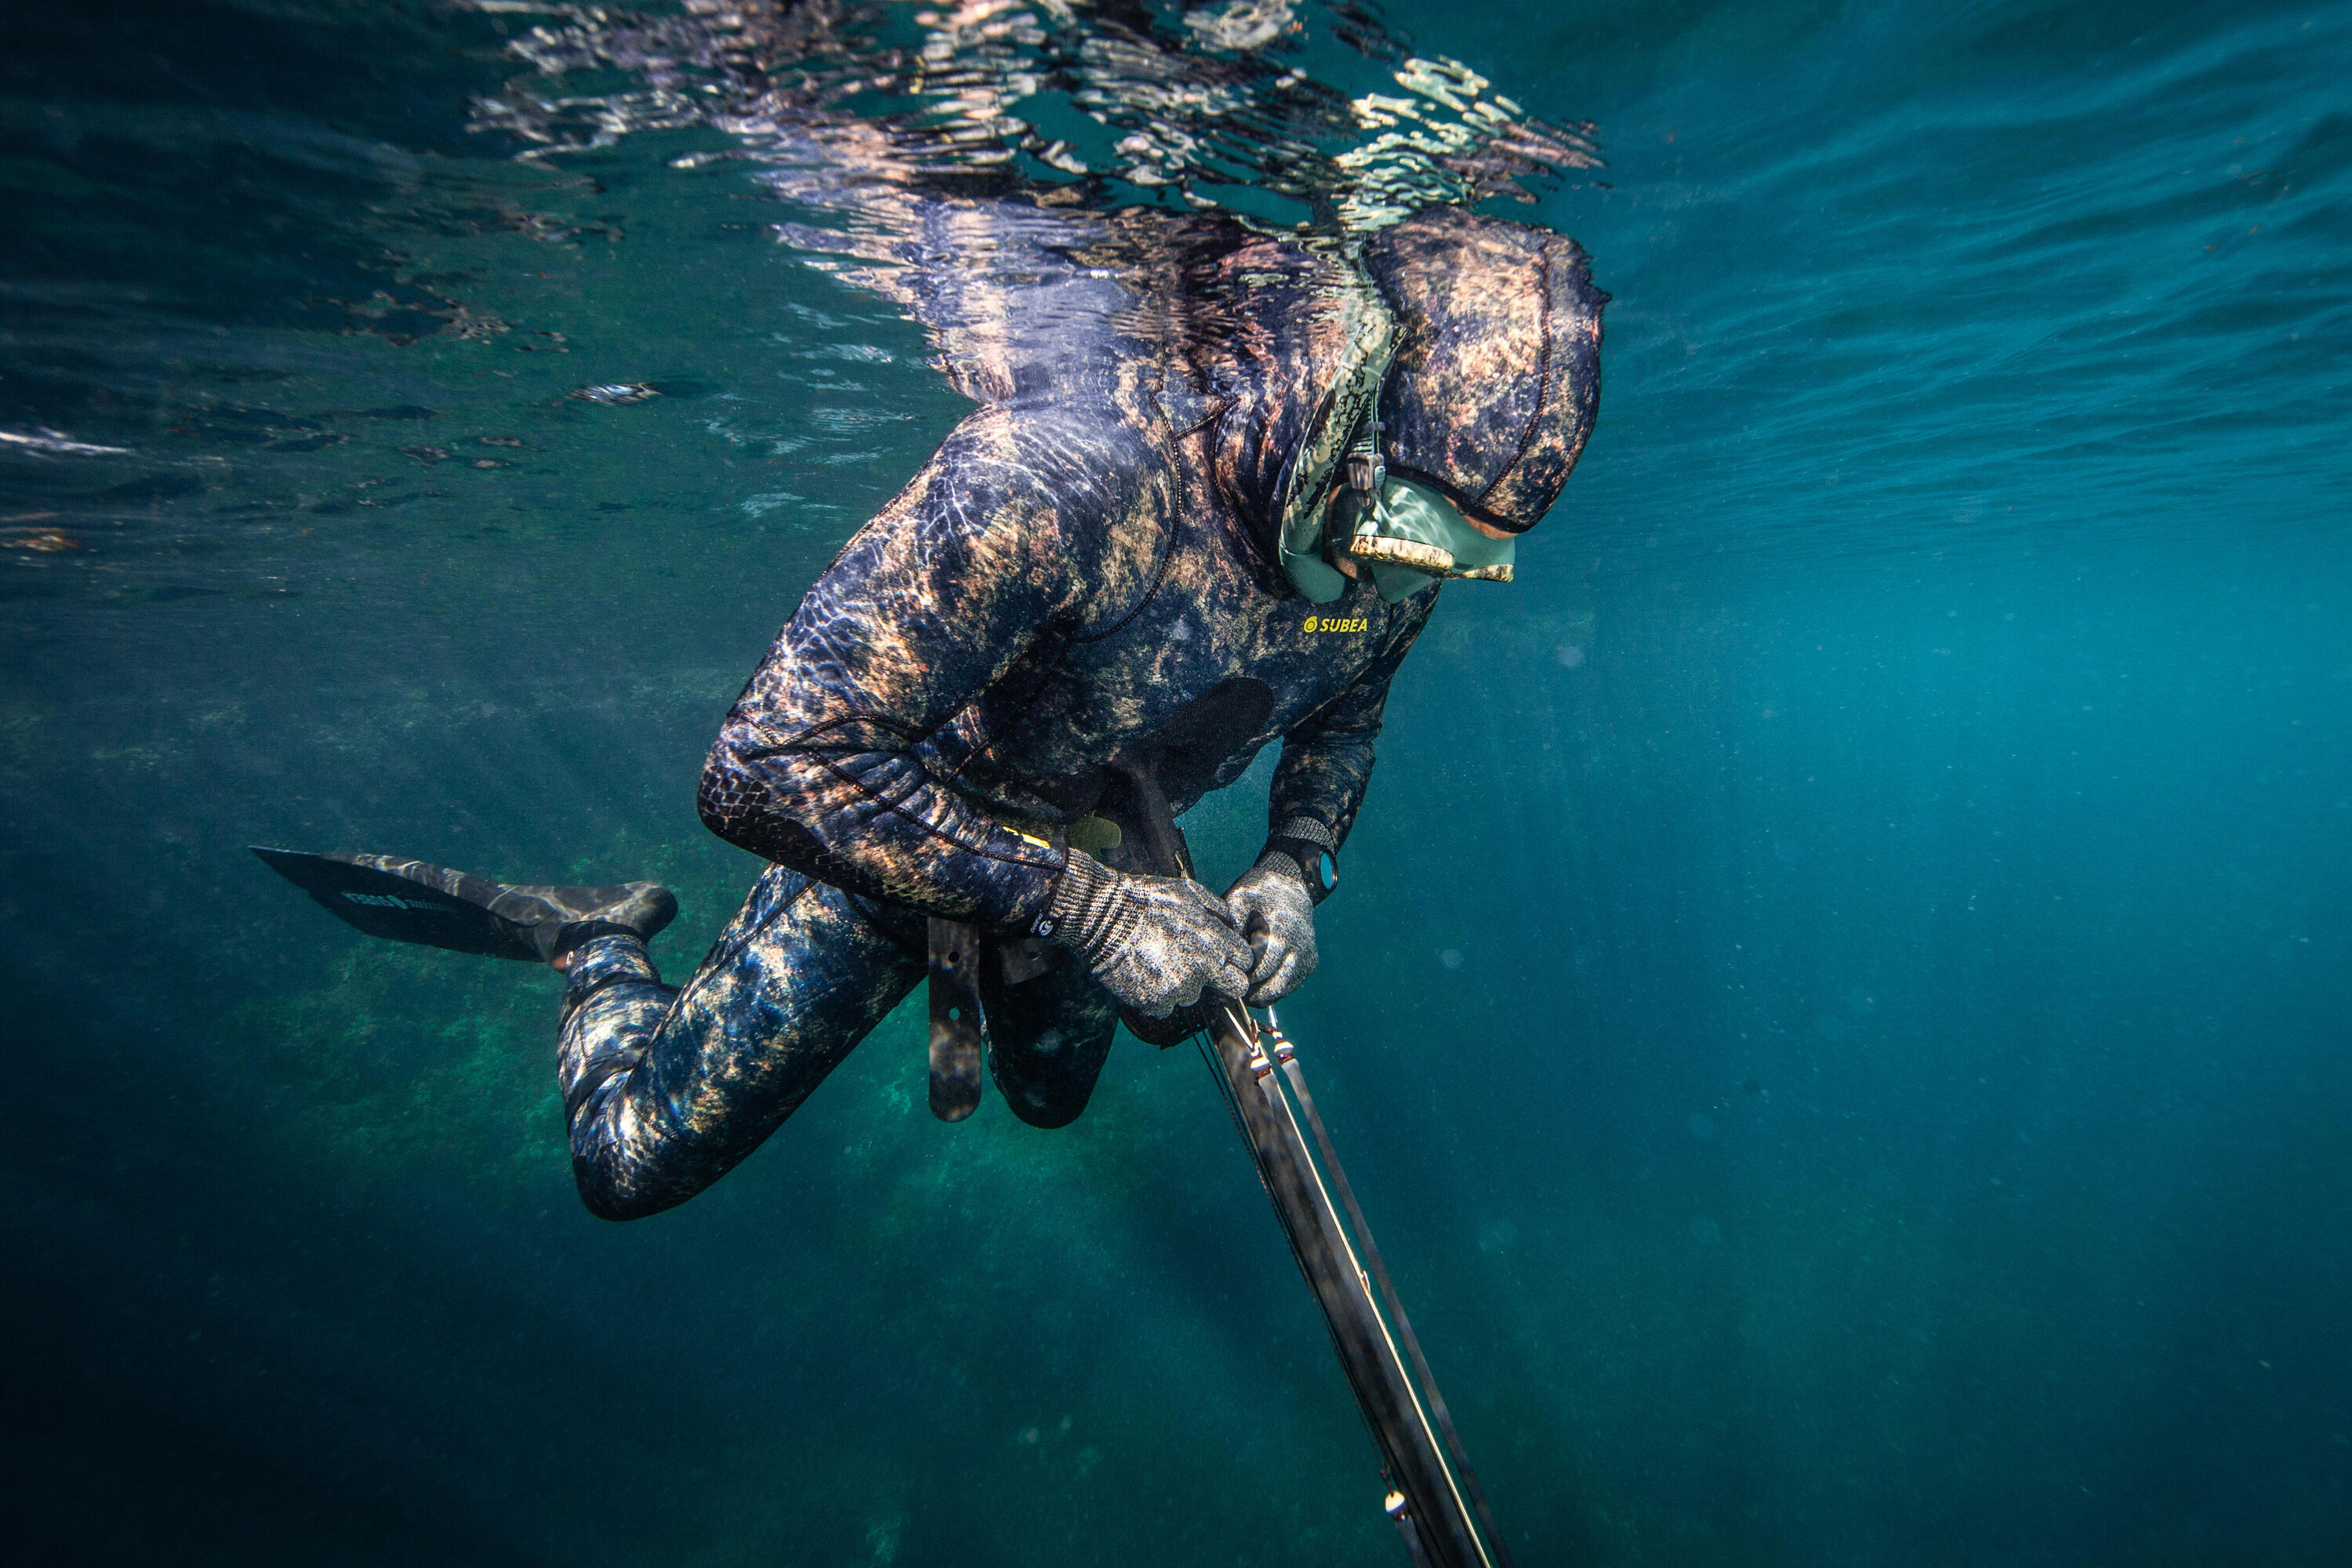 3mm split neoprene camouflage trousers for free-diving